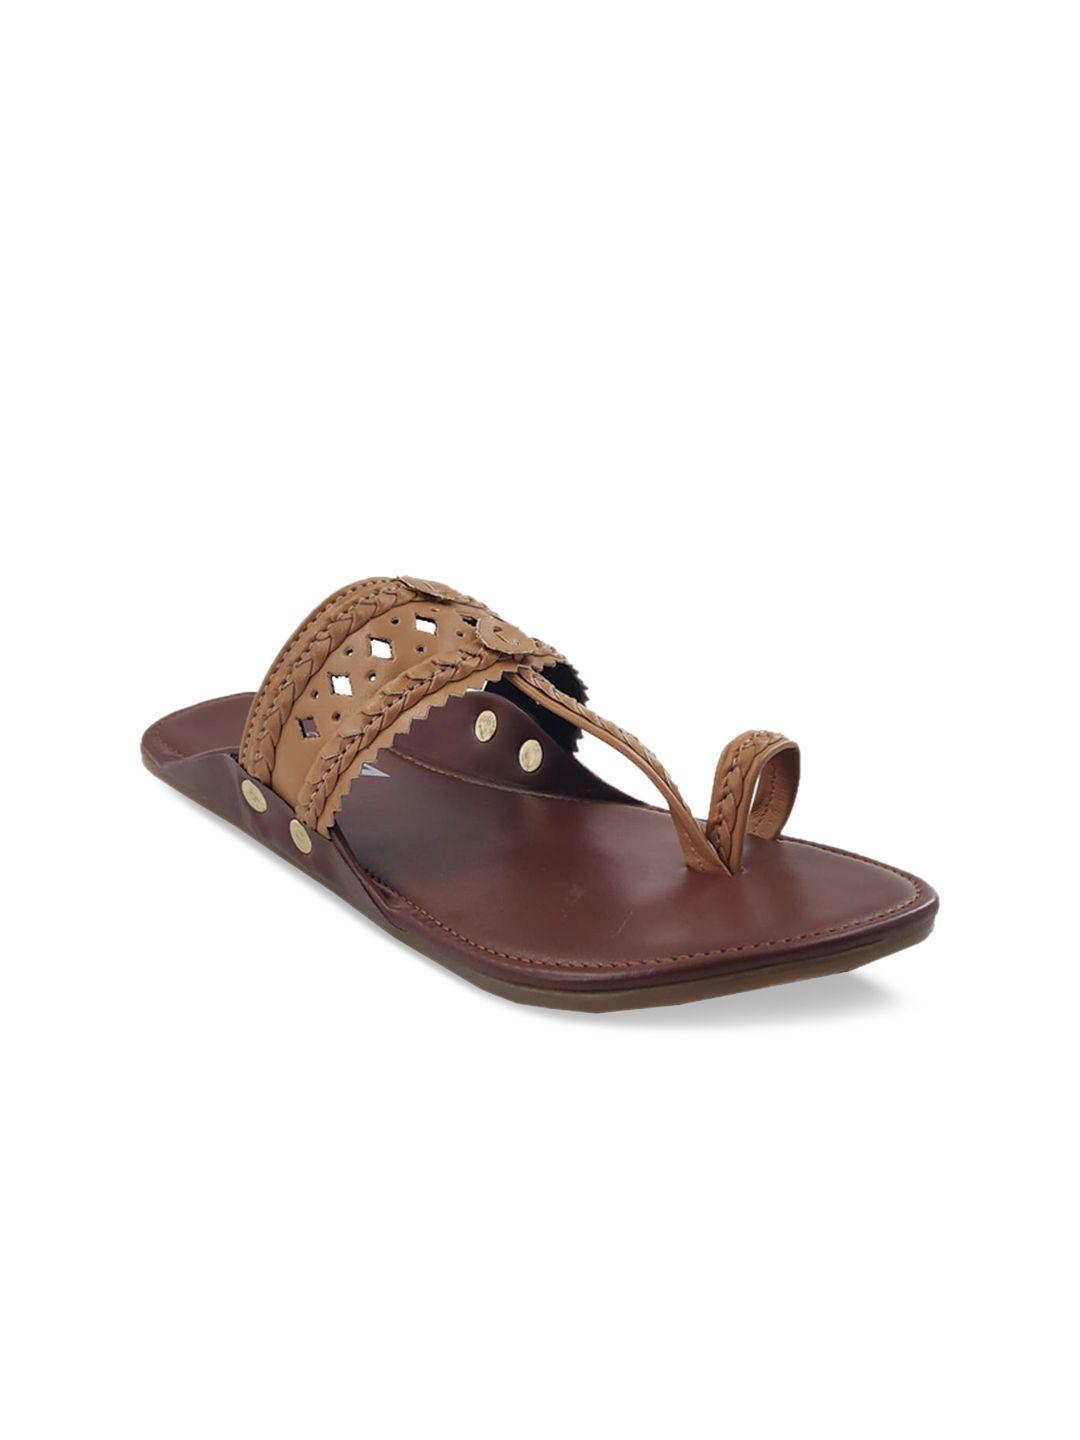 the madras trunk women brown solid leather open toe flats